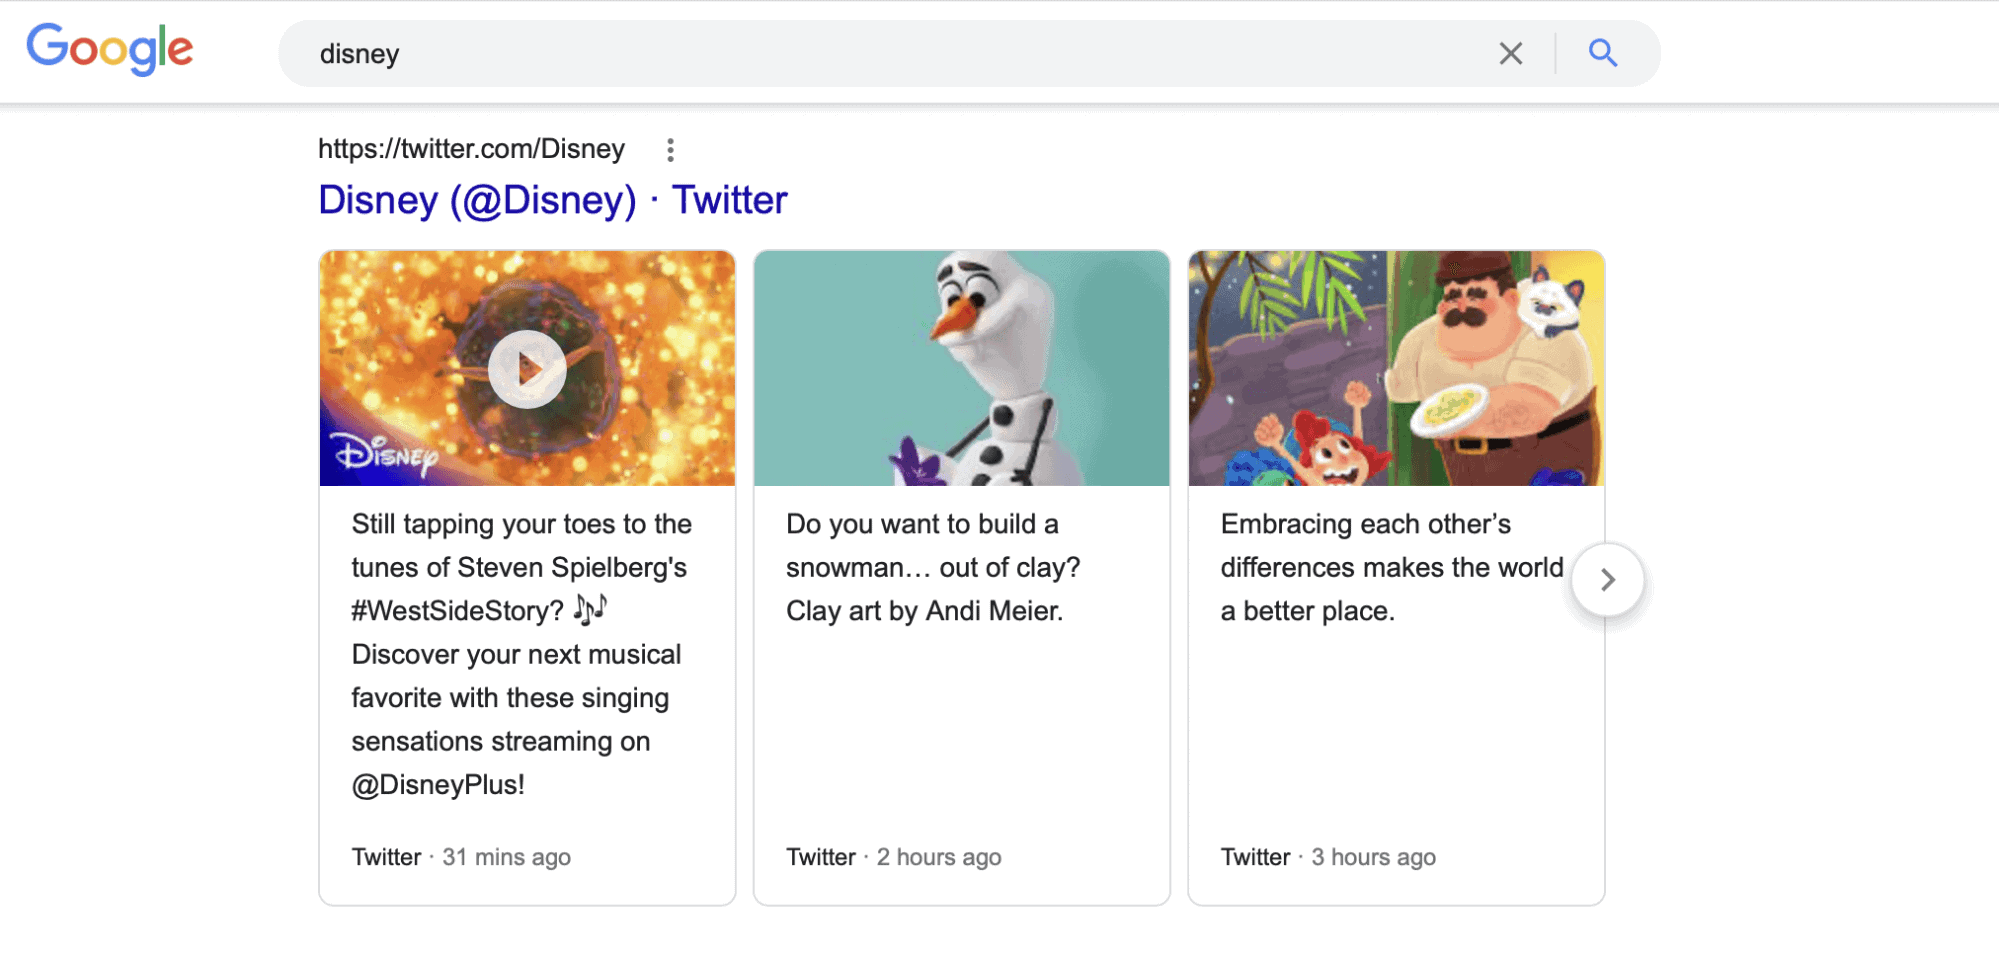 Tweets in Google featured snippets